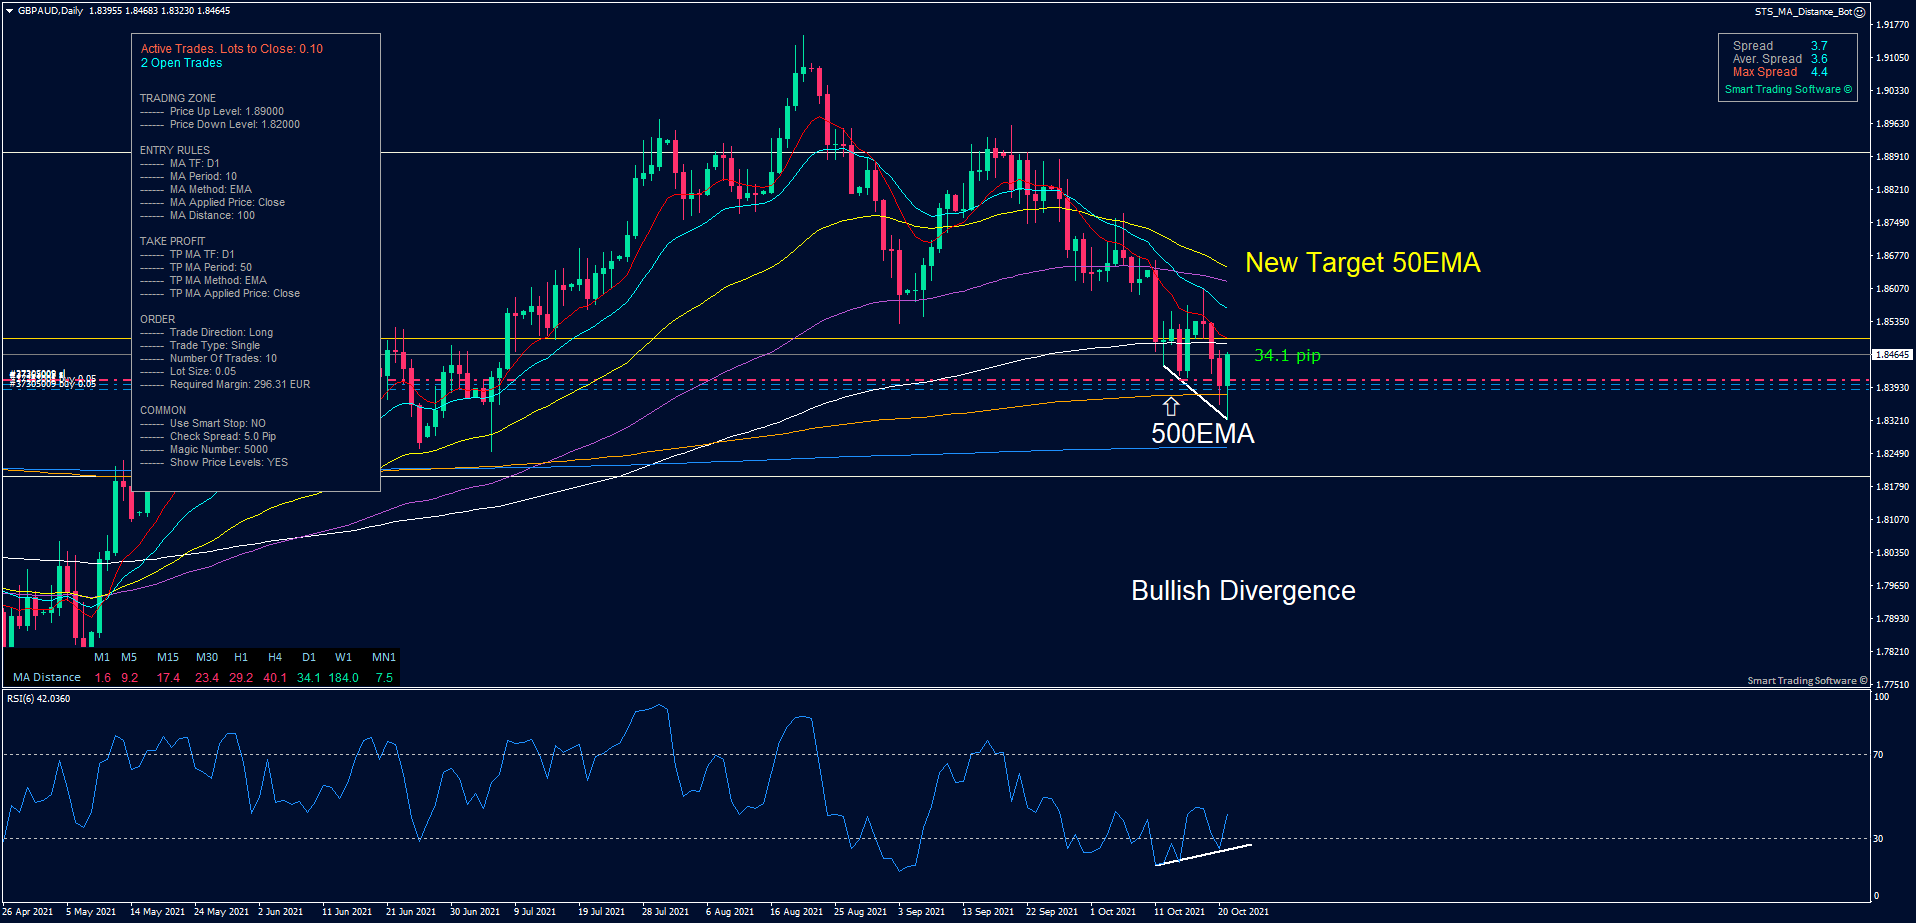 GBP/AUD daily chart